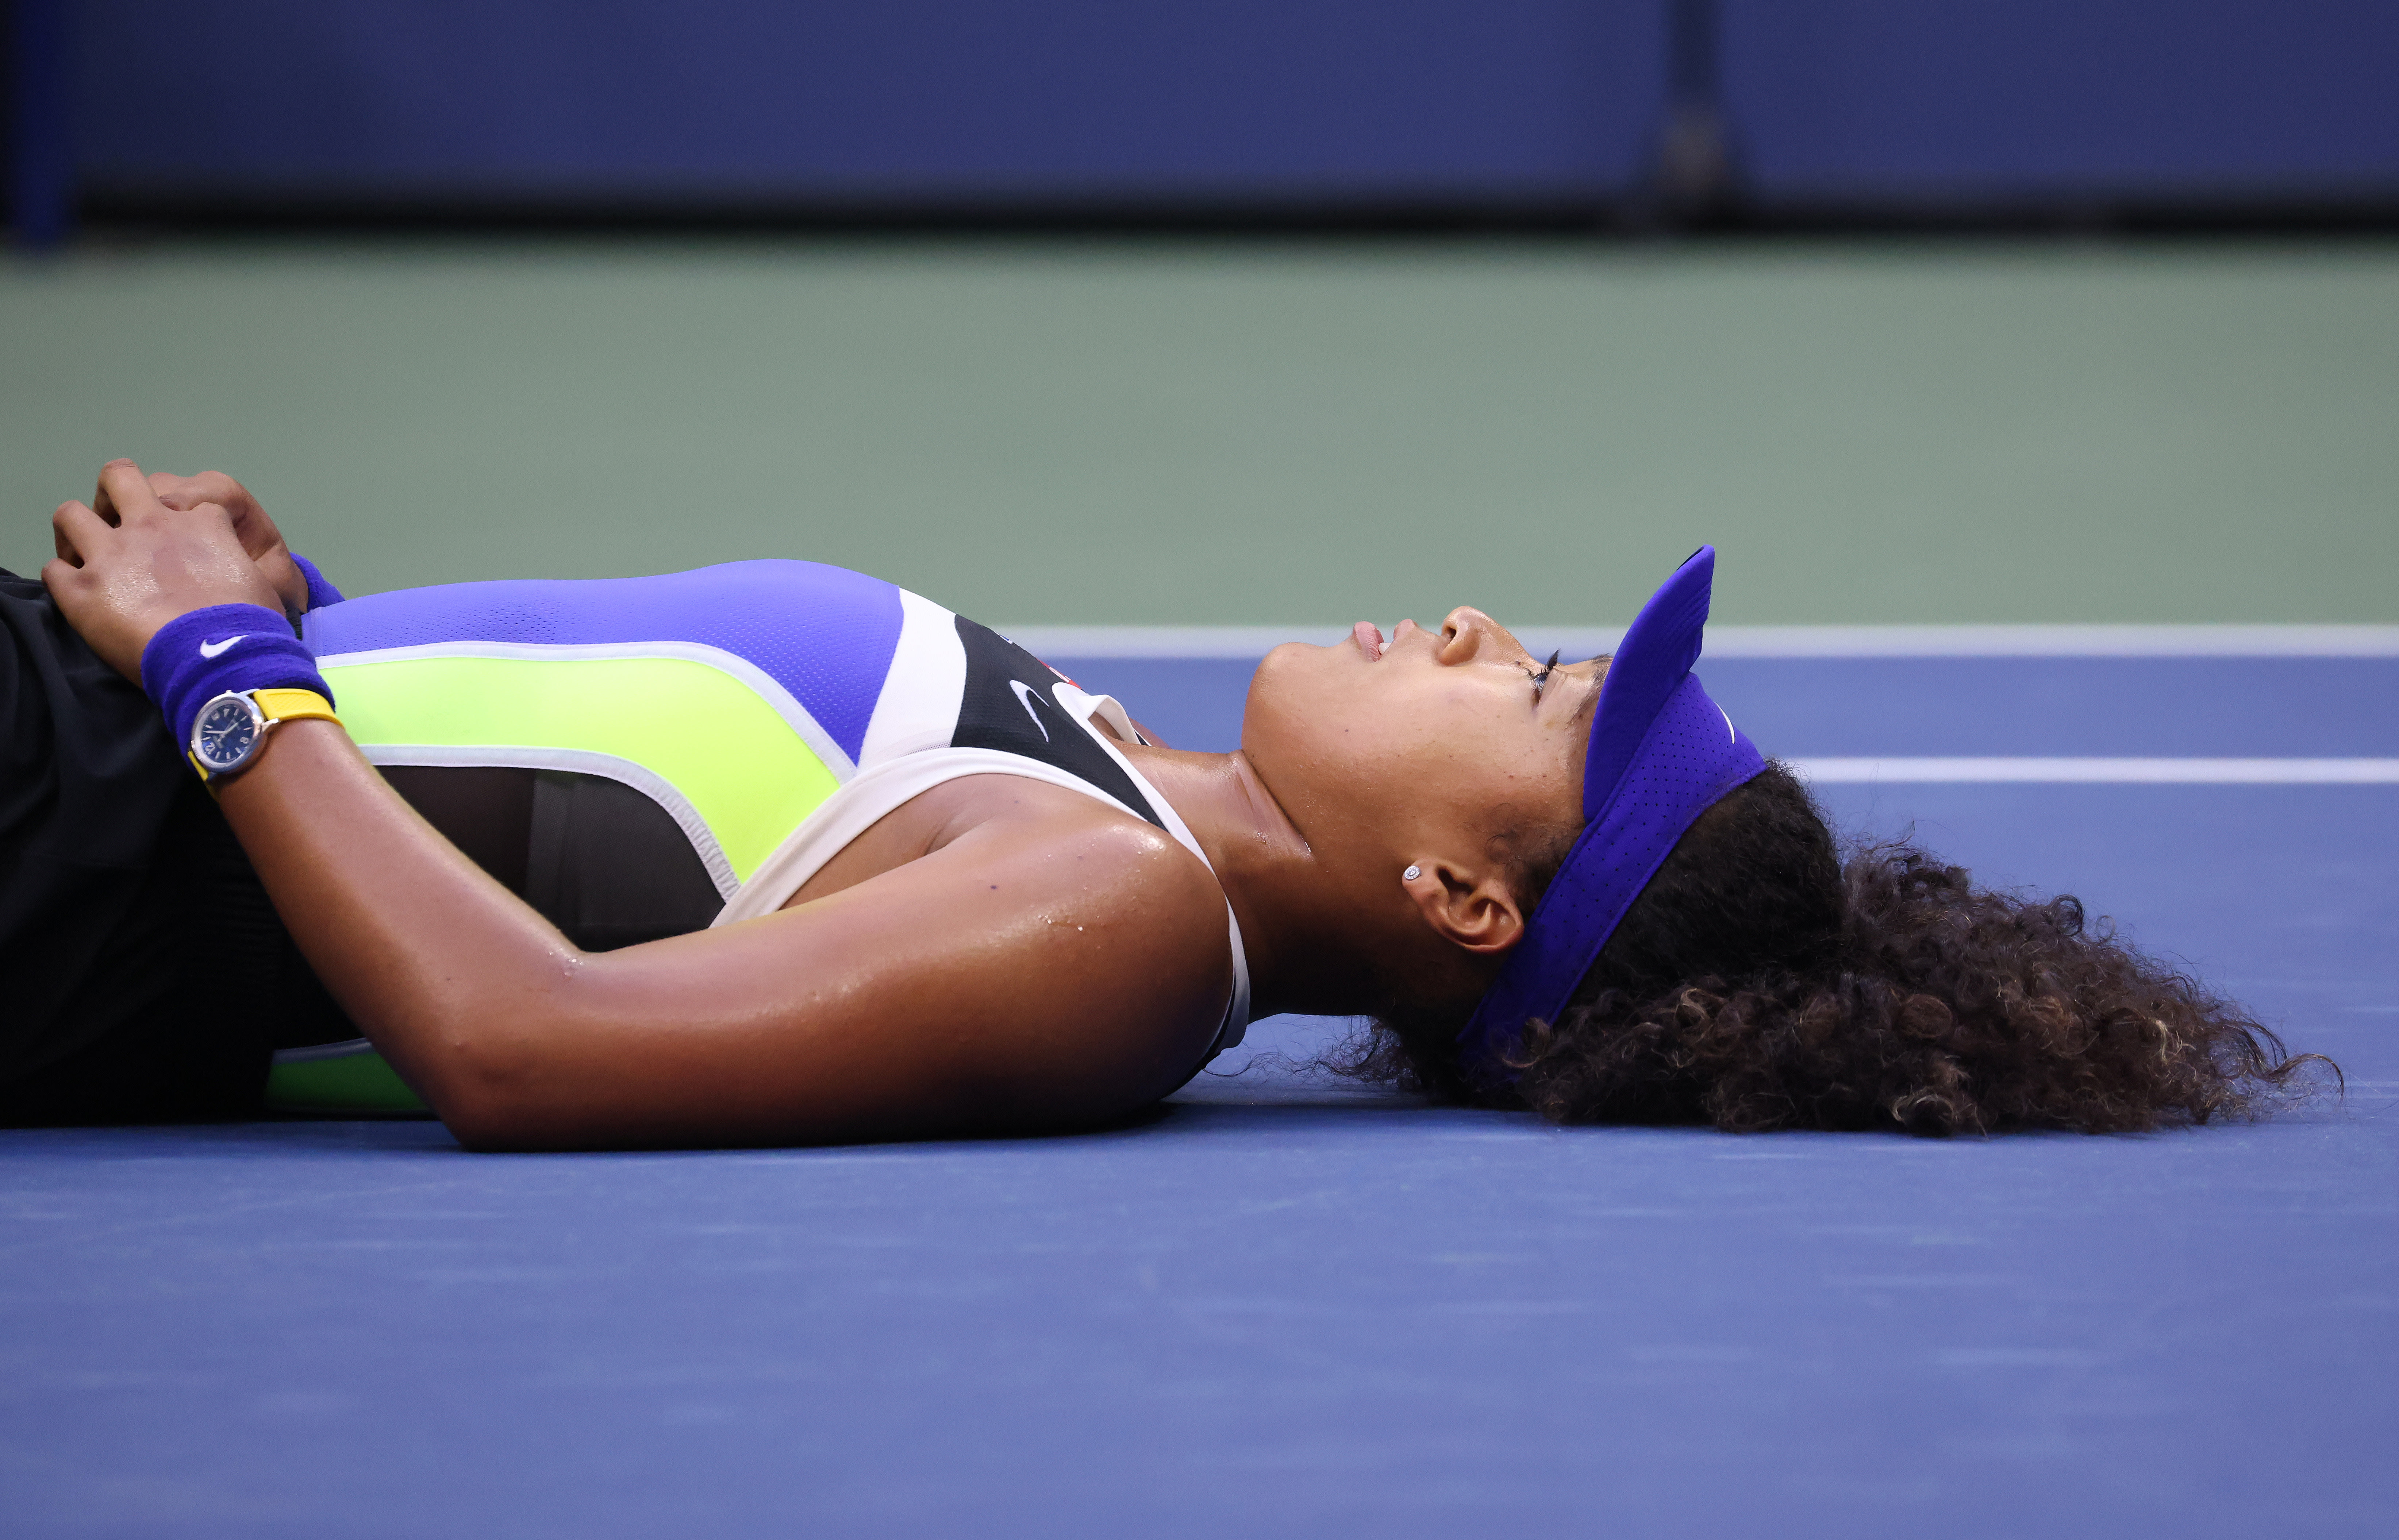 Netflix's 'Naomi Osaka' Explores the Mental Toll of Being a Champion